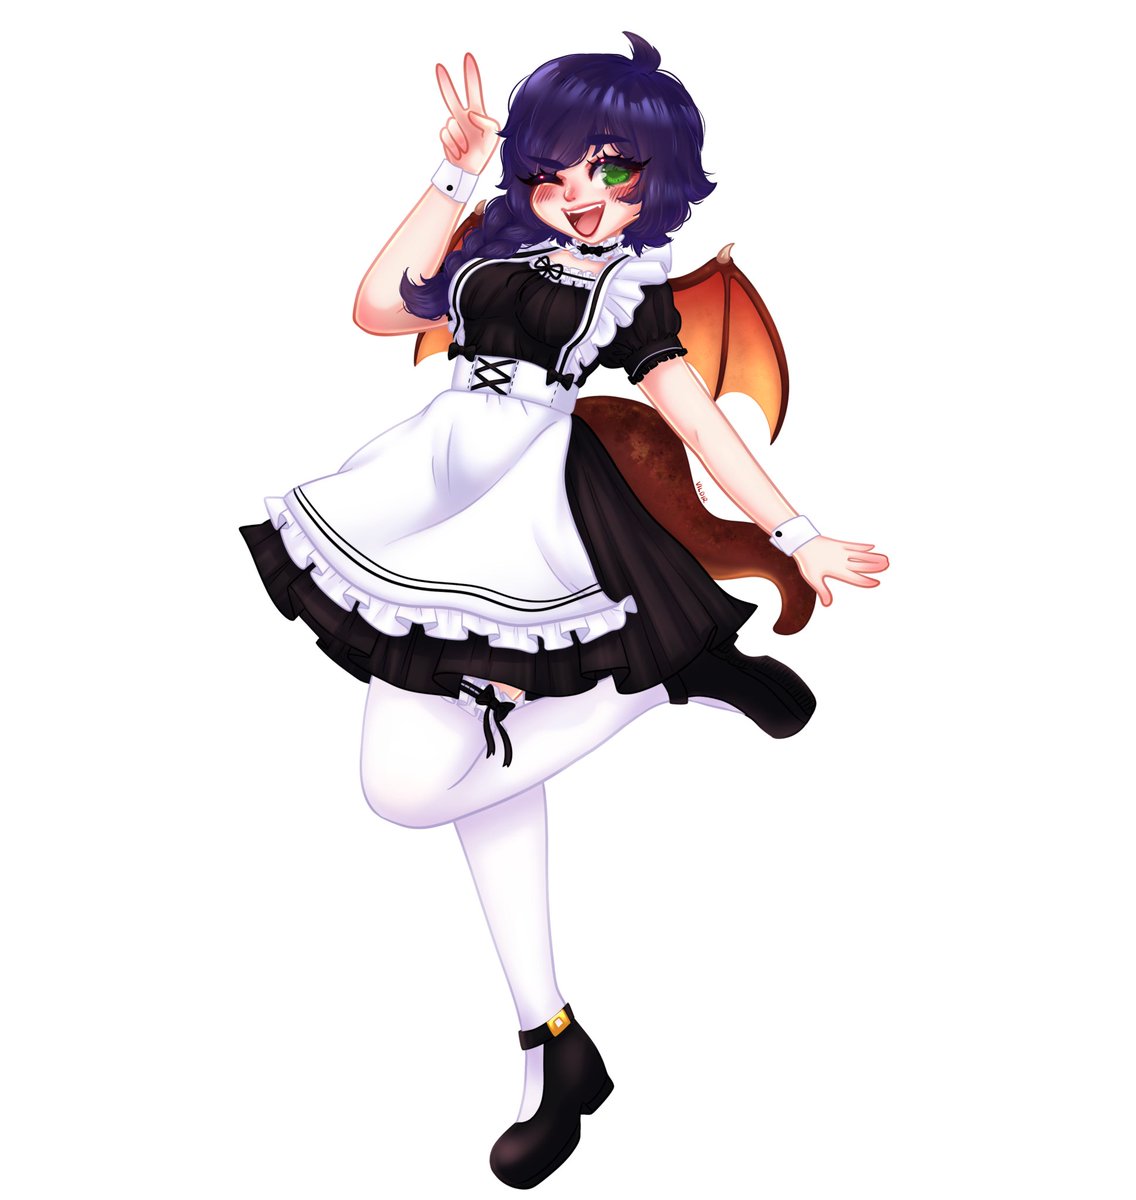 Thank you all my adorable hatchlings who came and hung out with me tonight! Had alot of fun chatting and playing Stardew! 

I know I was being a dork talking about anime, but I had fun! So thank you! Lots of love 💜 see you all Thursday! 

Enjoy maid may! 
🎨@/_vildir_